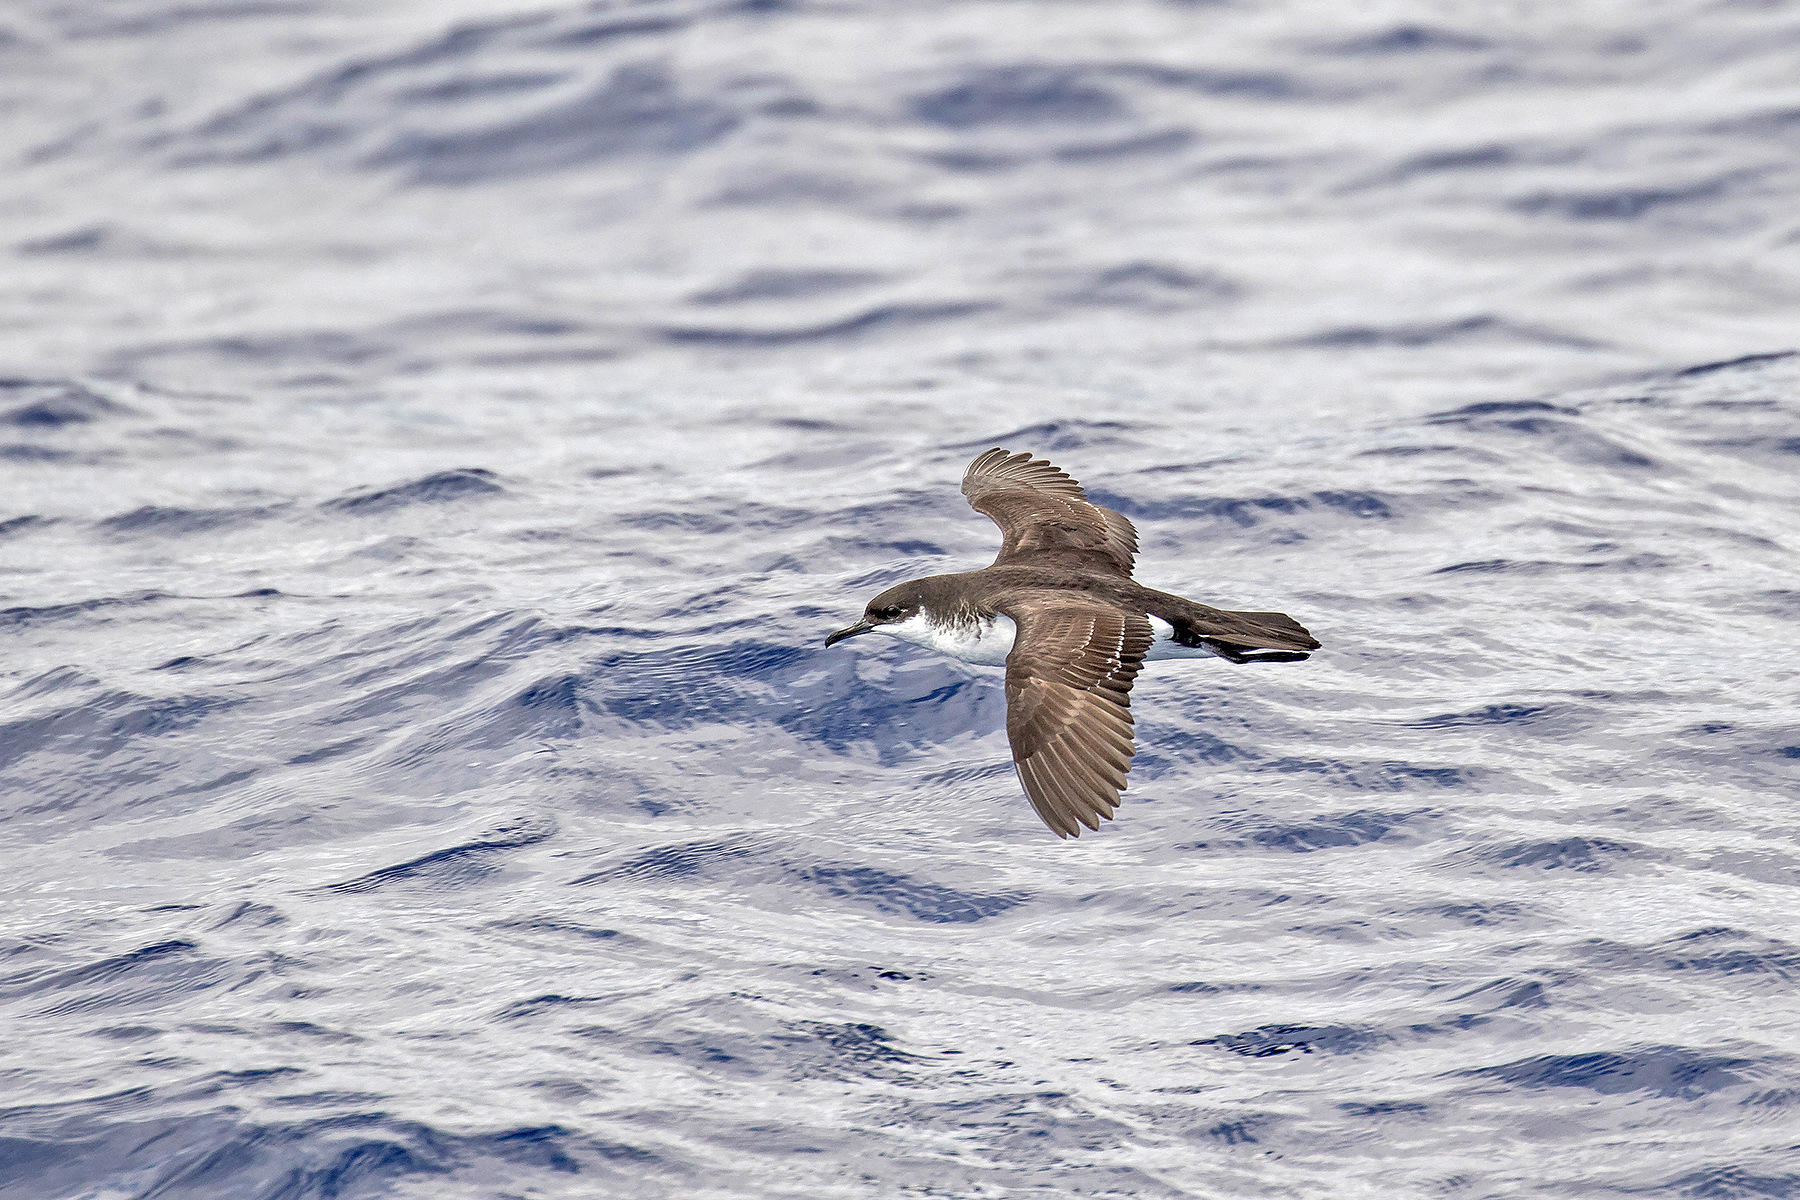 Newell's Shearwater on our Hawaii birding tour (image by Pete Morris)